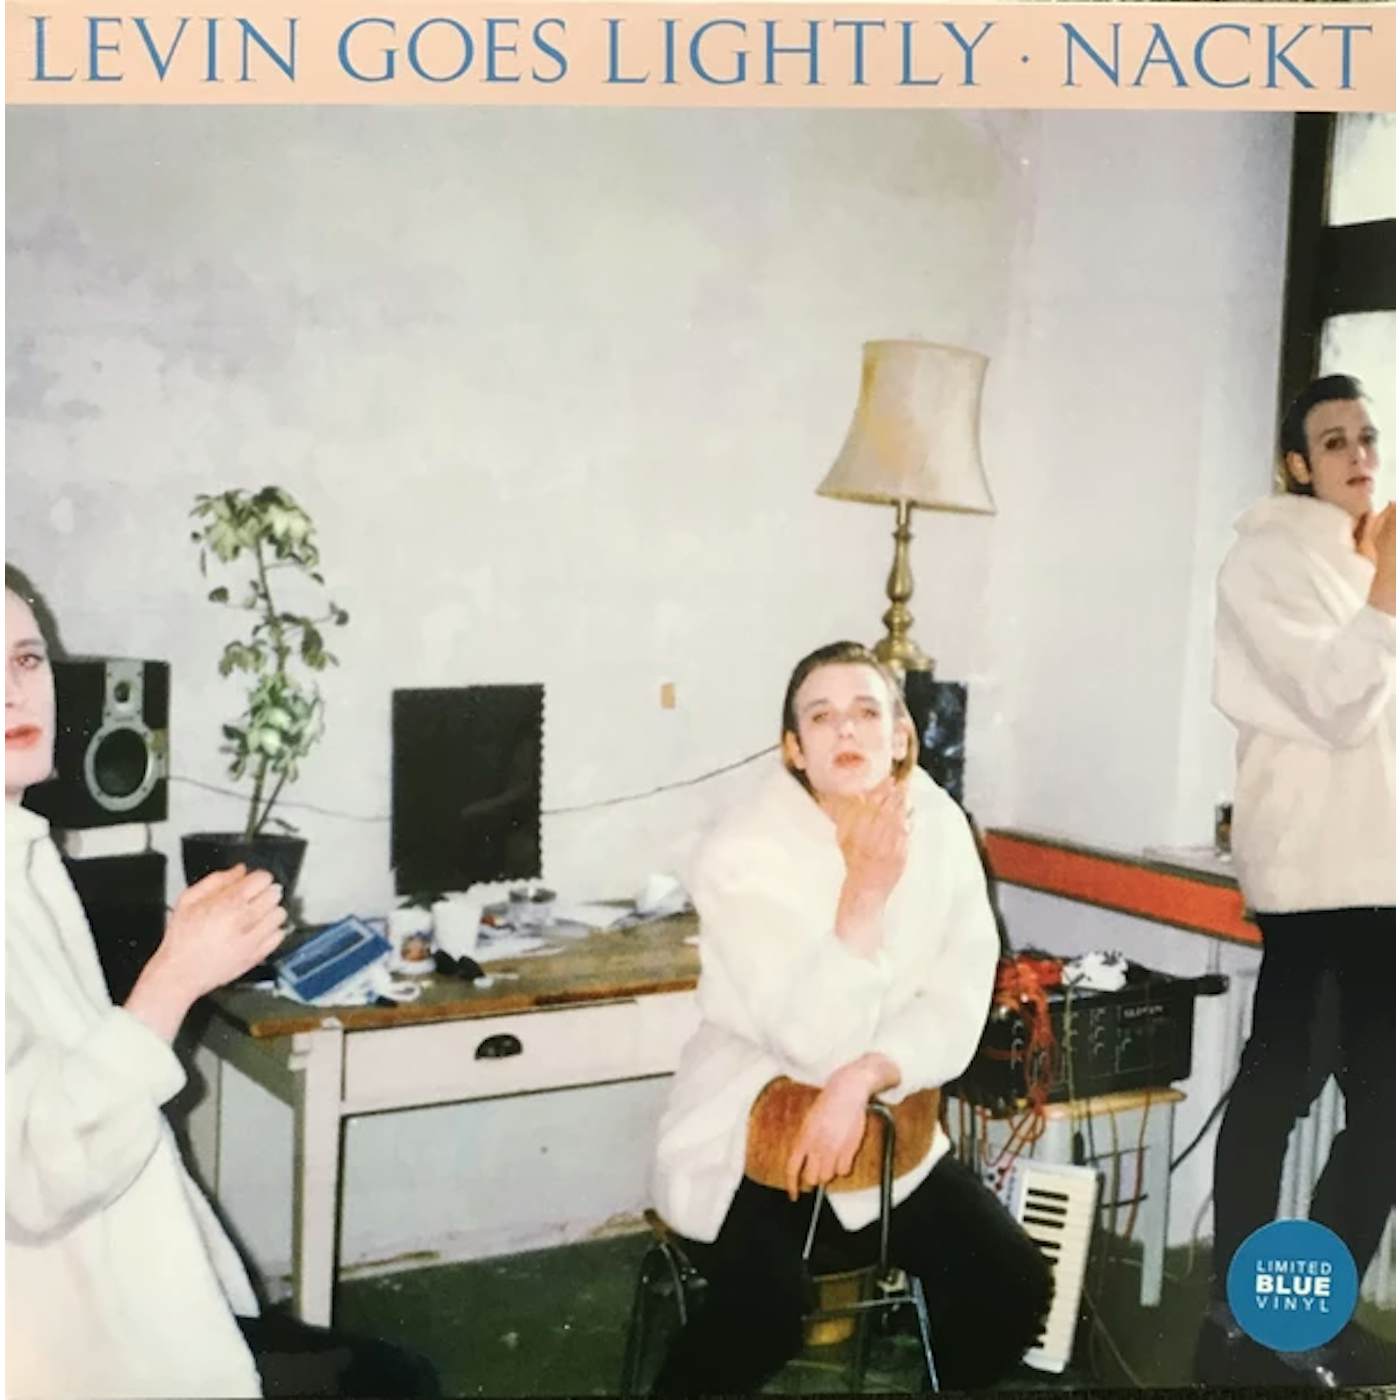 Levin Goes Lightly Nackt Vinyl Record